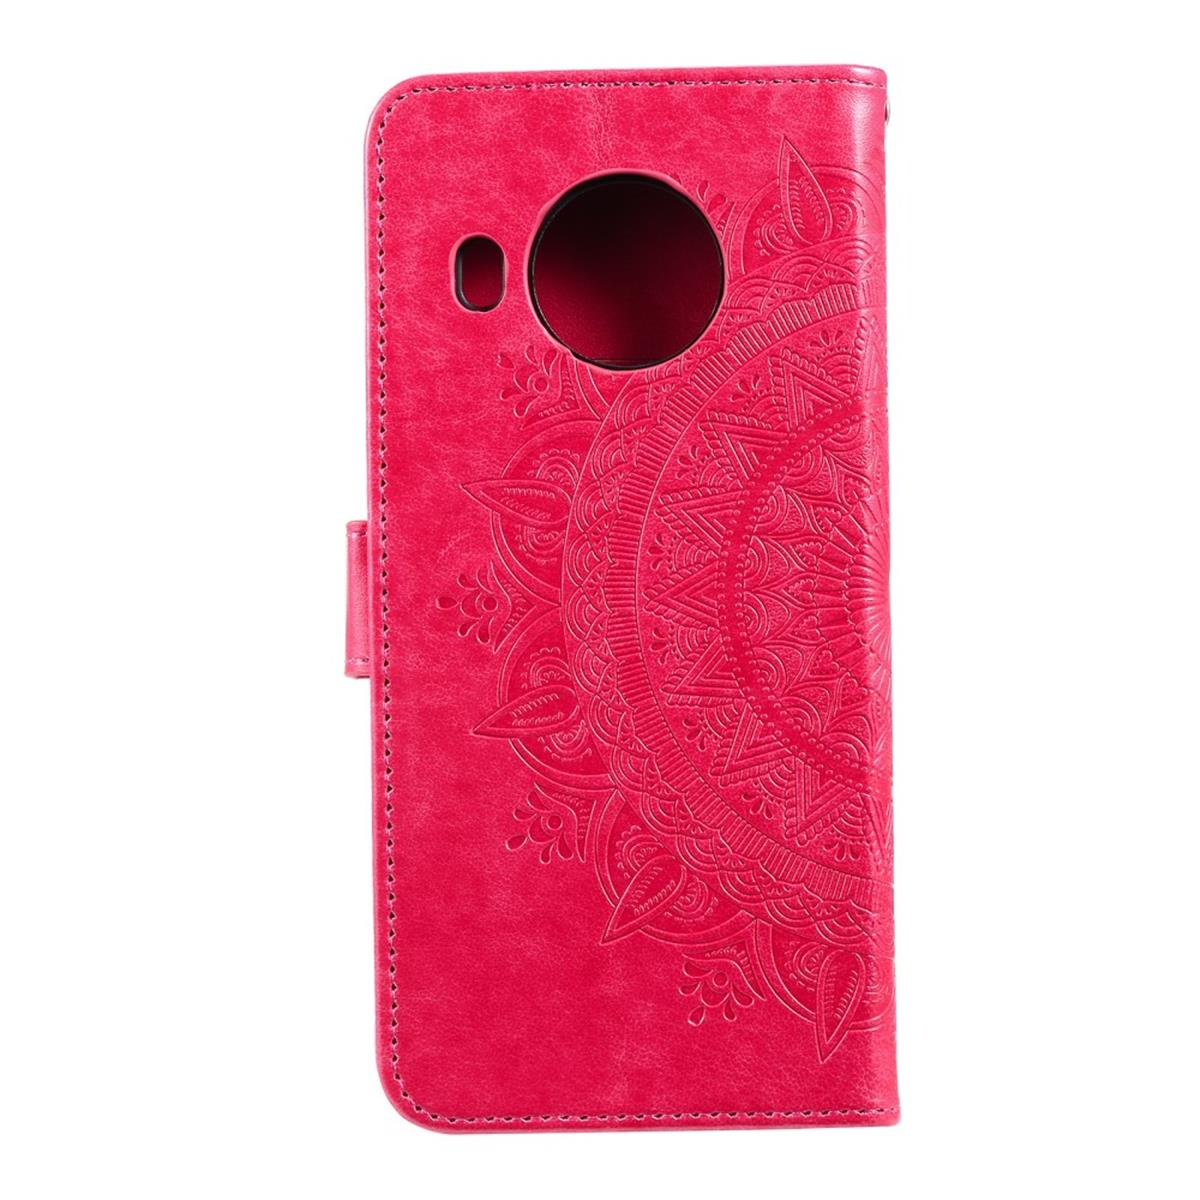 COVERKINGZ Bookcover, X10/X20, Muster, Nokia, Klapphülle mit Pink Mandala